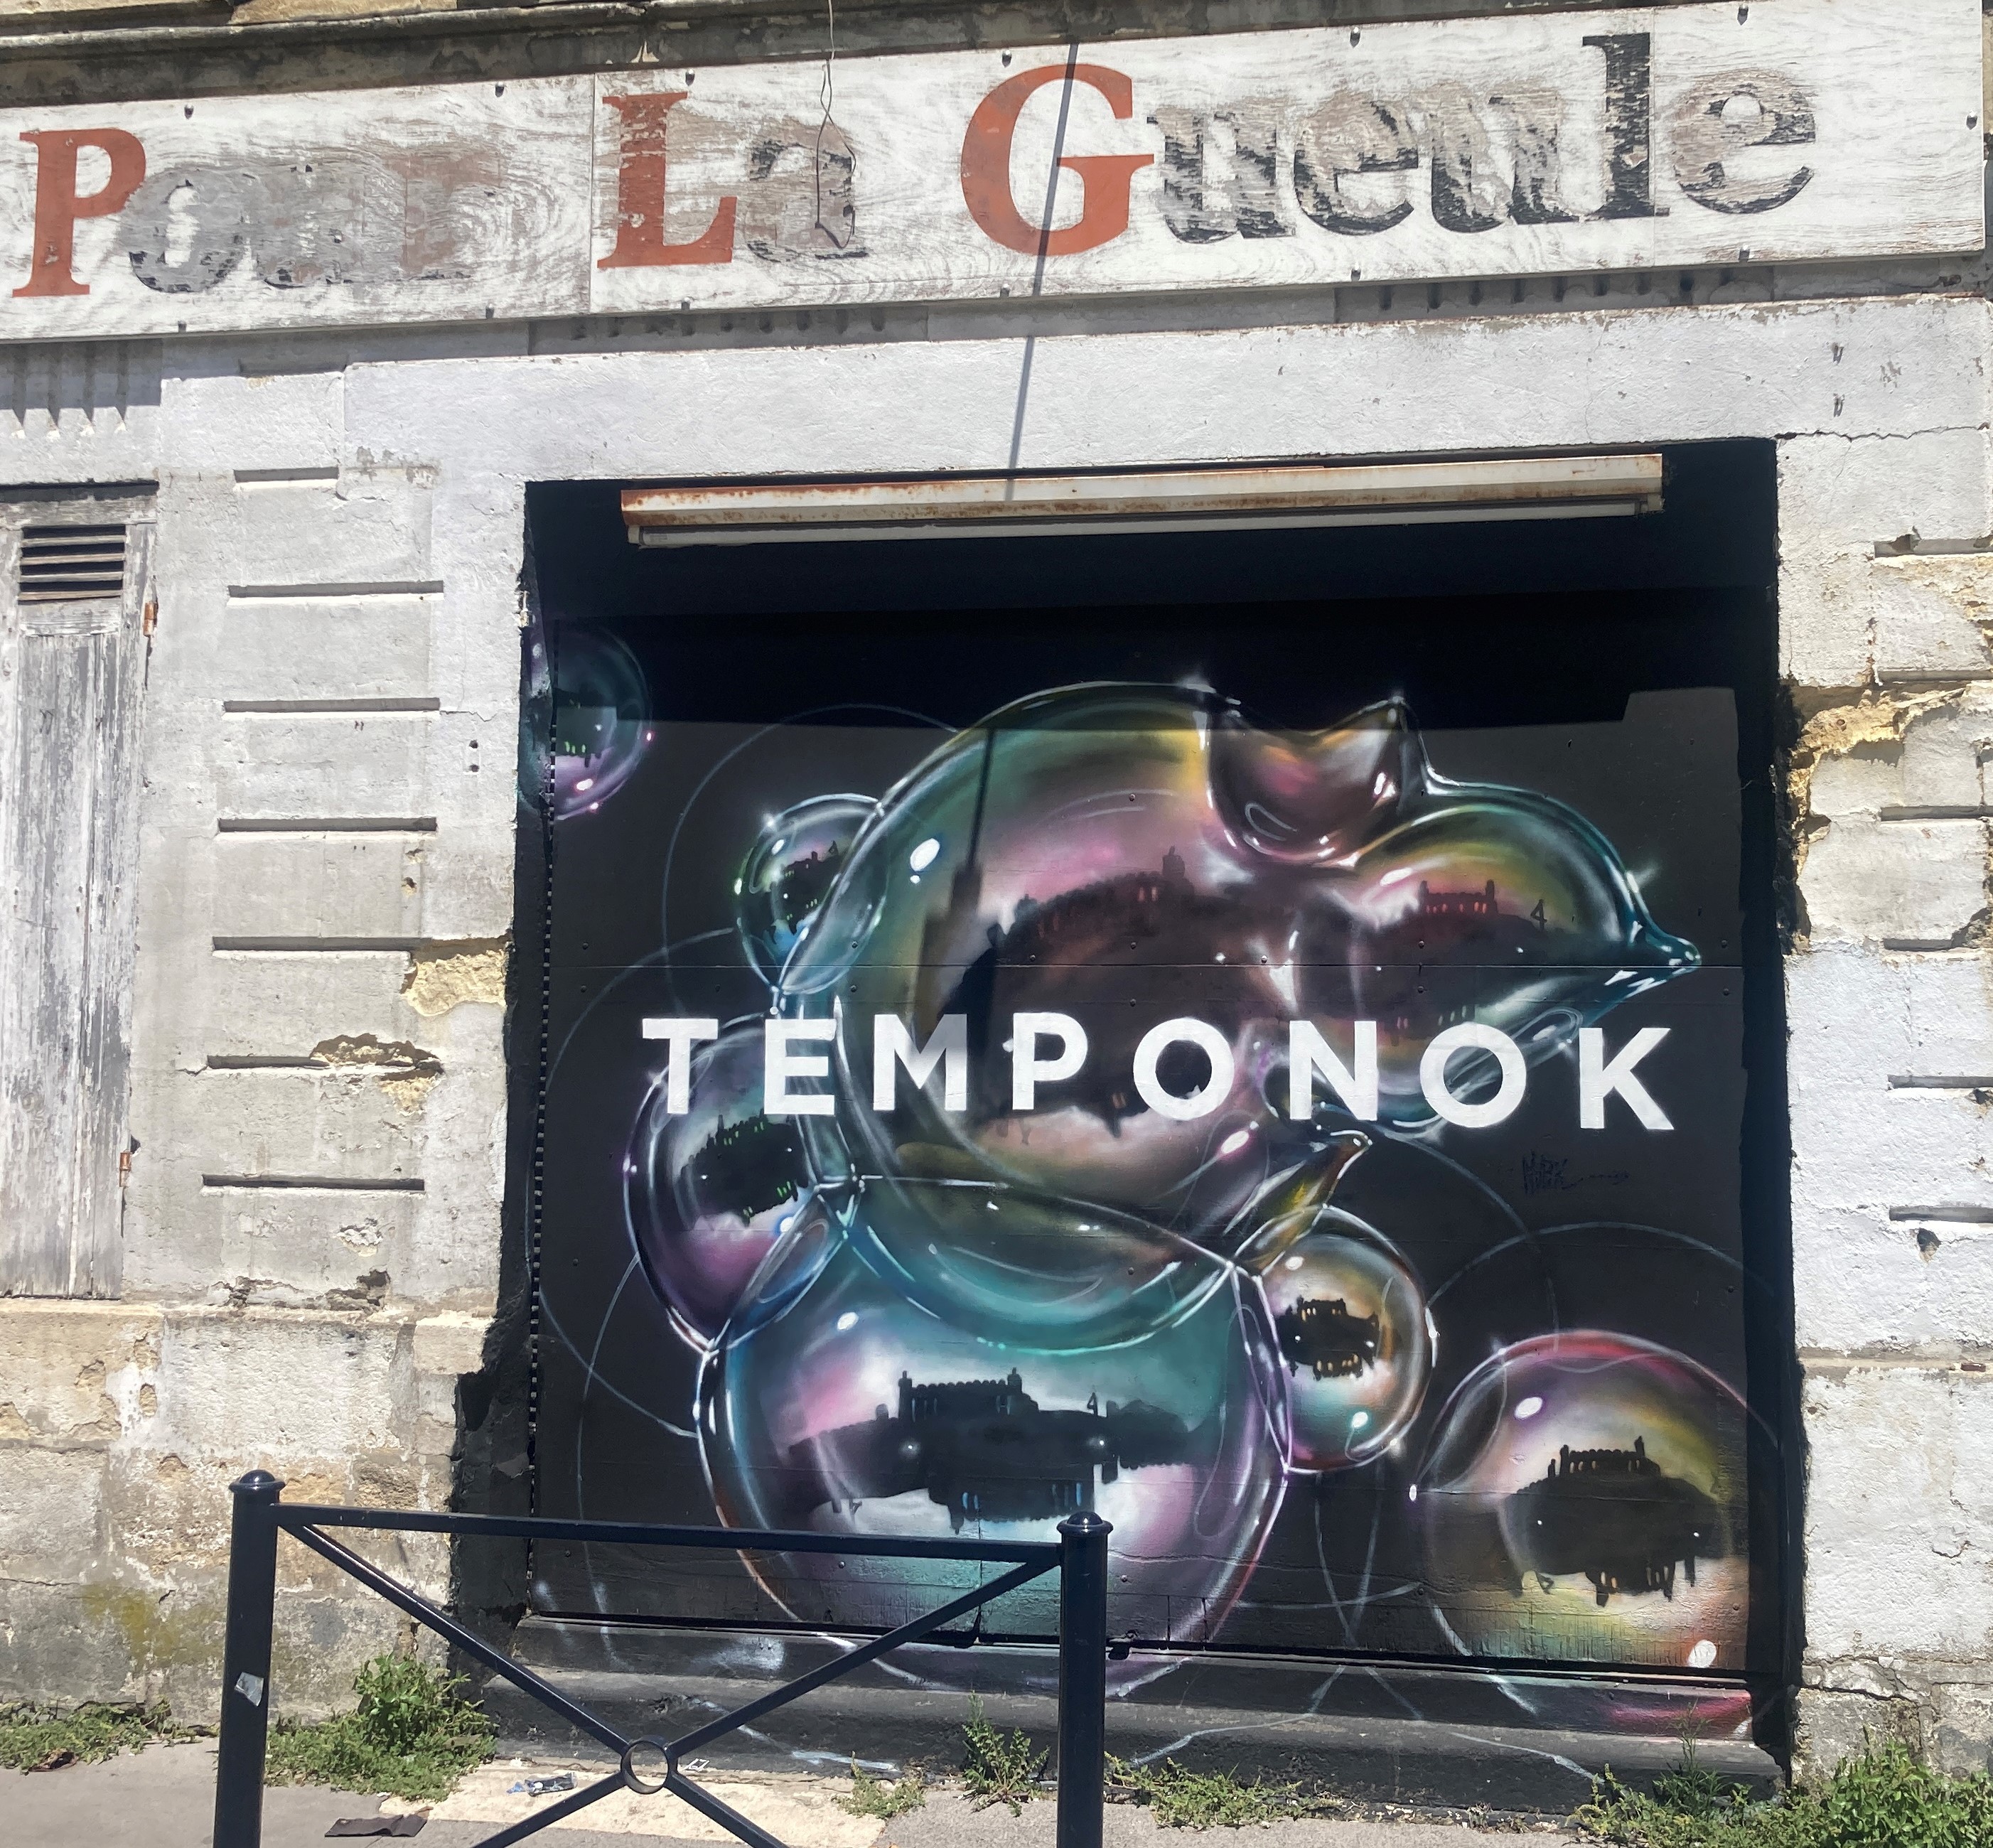 Graffiti 6889 TEMPONOK by the artist Tempo Nok captured by Mephisroth in Bordeaux France